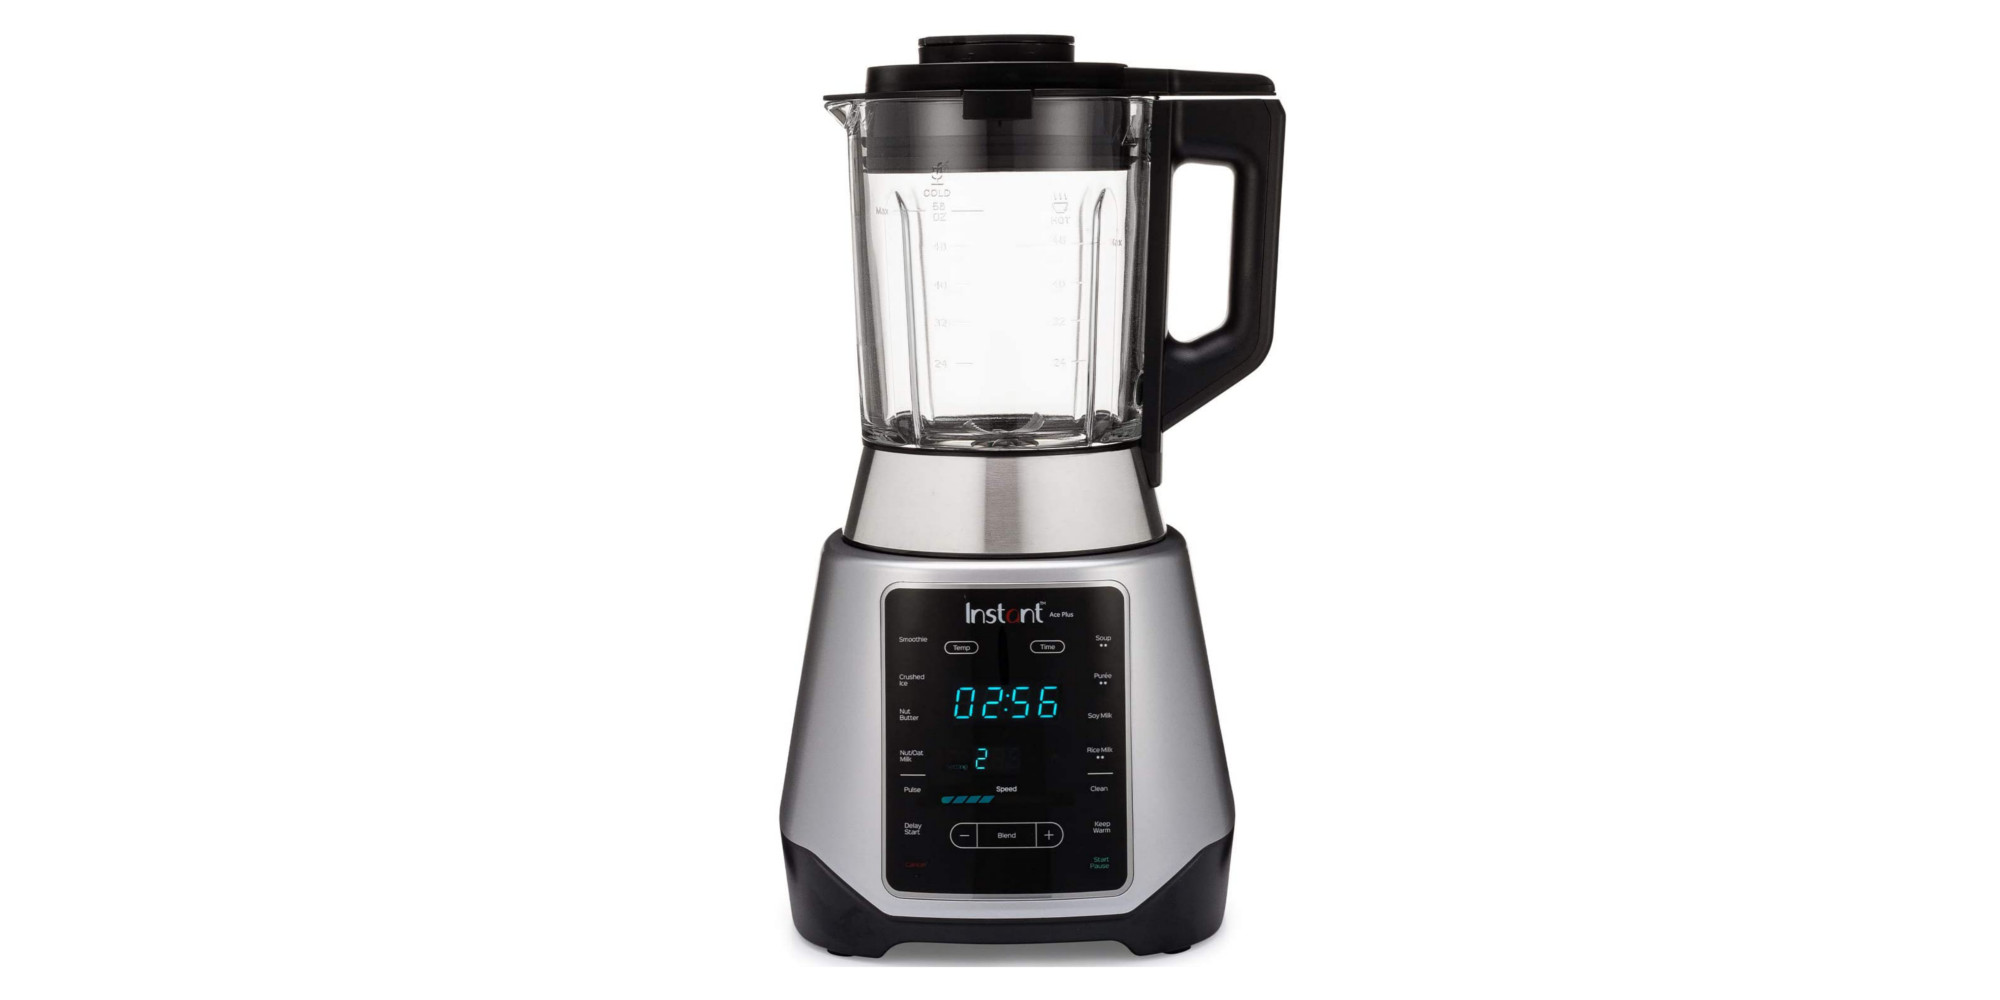 https://9to5toys.com/wp-content/uploads/sites/5/2021/04/Instant-Pot-Ace-Plus-10-in-1-Smoothie-and-Soup-Blender.jpg